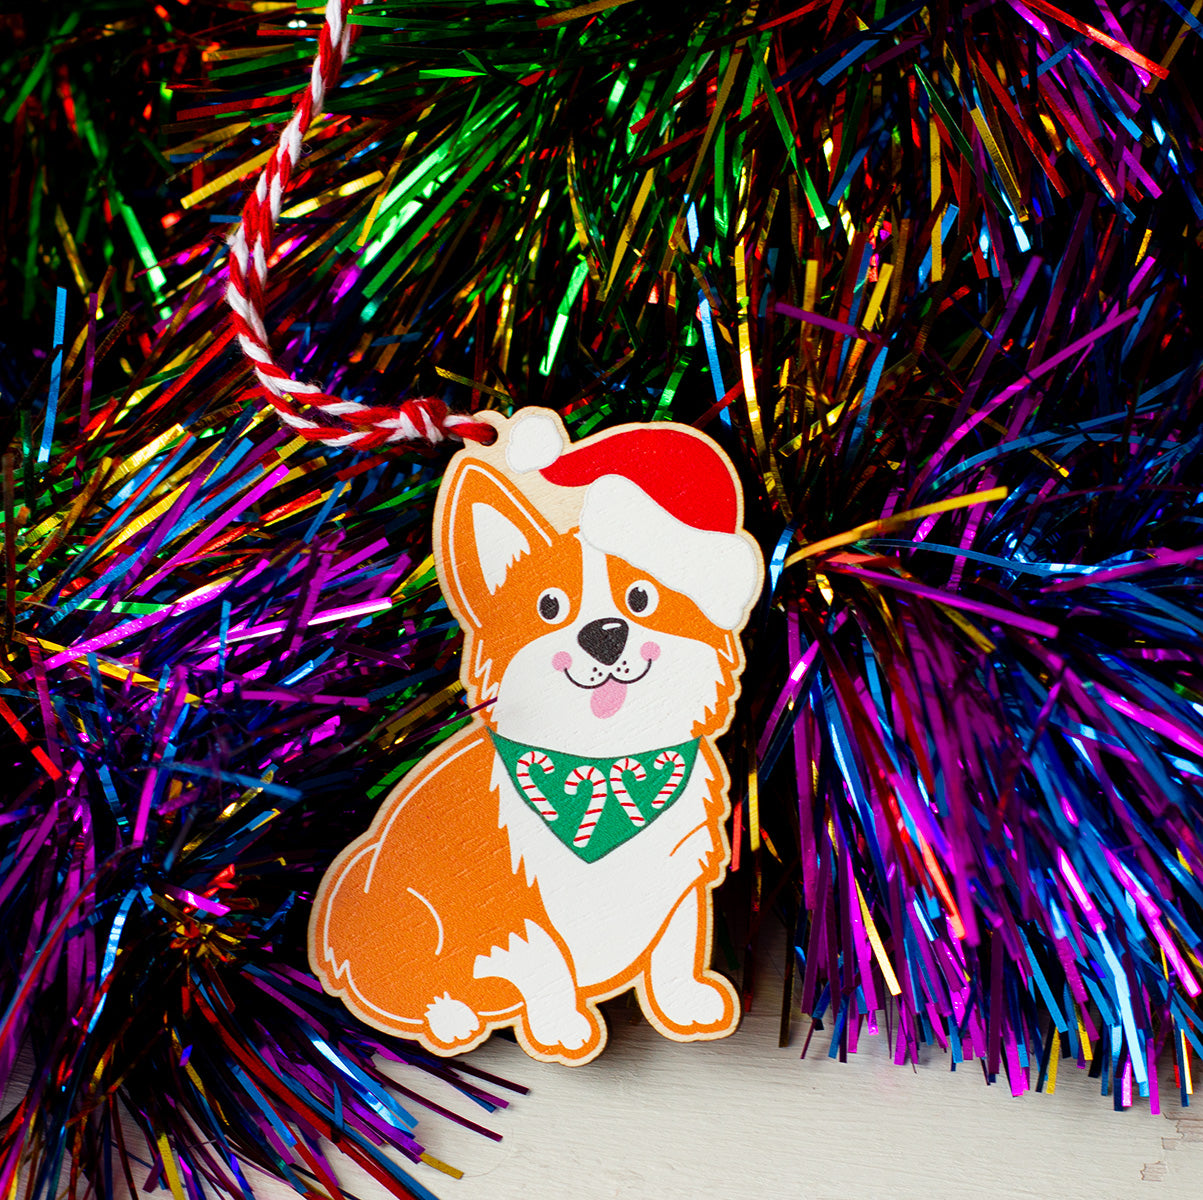 Gingerbread style corgi dog with a santa hat and a bandana with candy canes on it